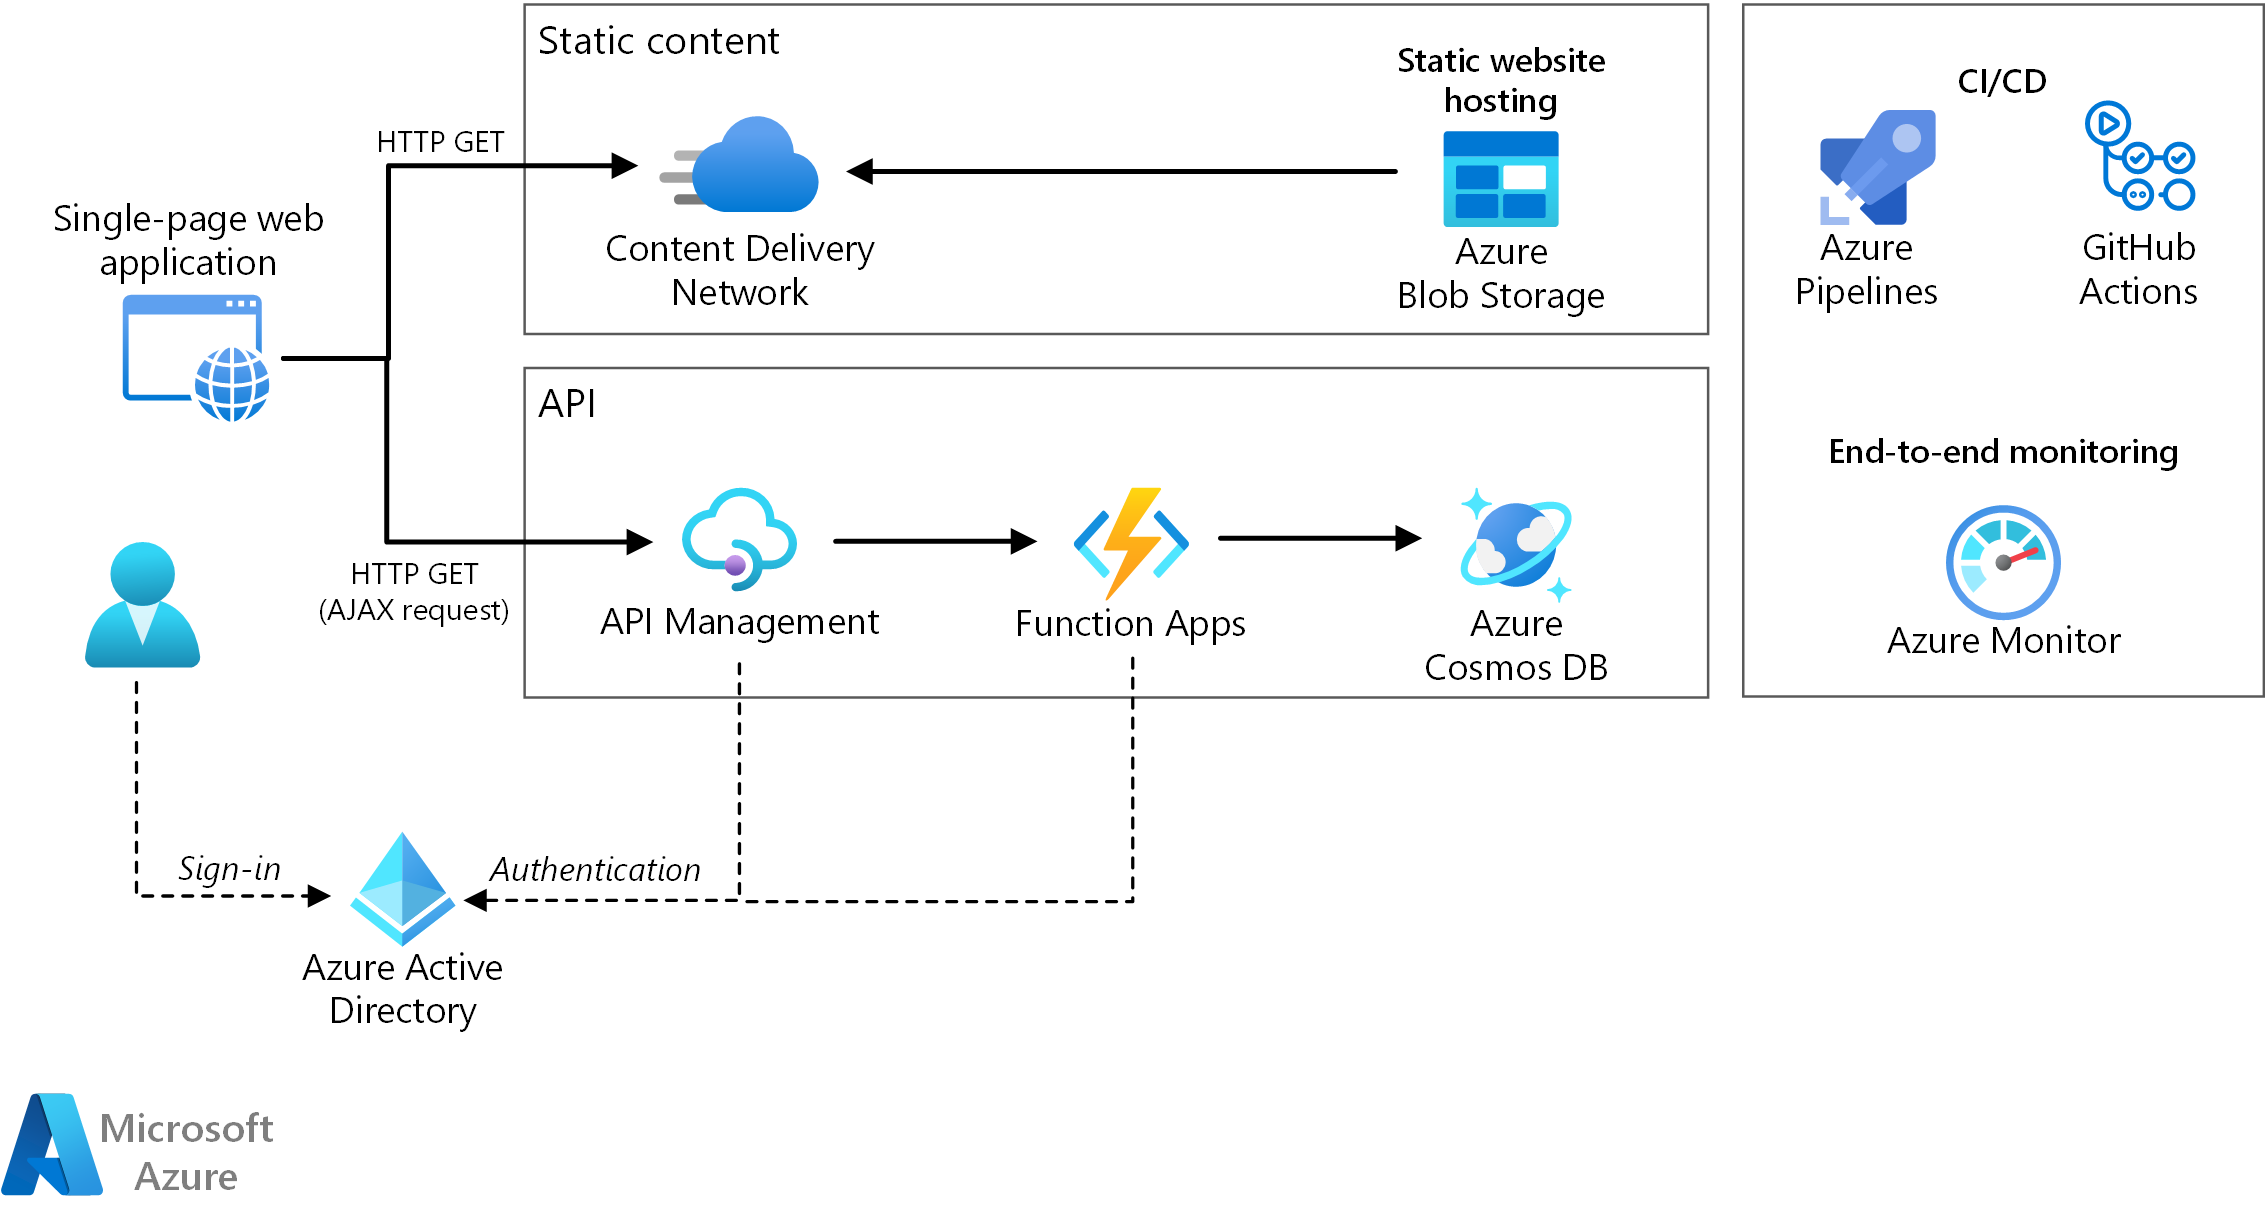 image from Azure Function App Use Cases: How to Leverage Serverless Computing